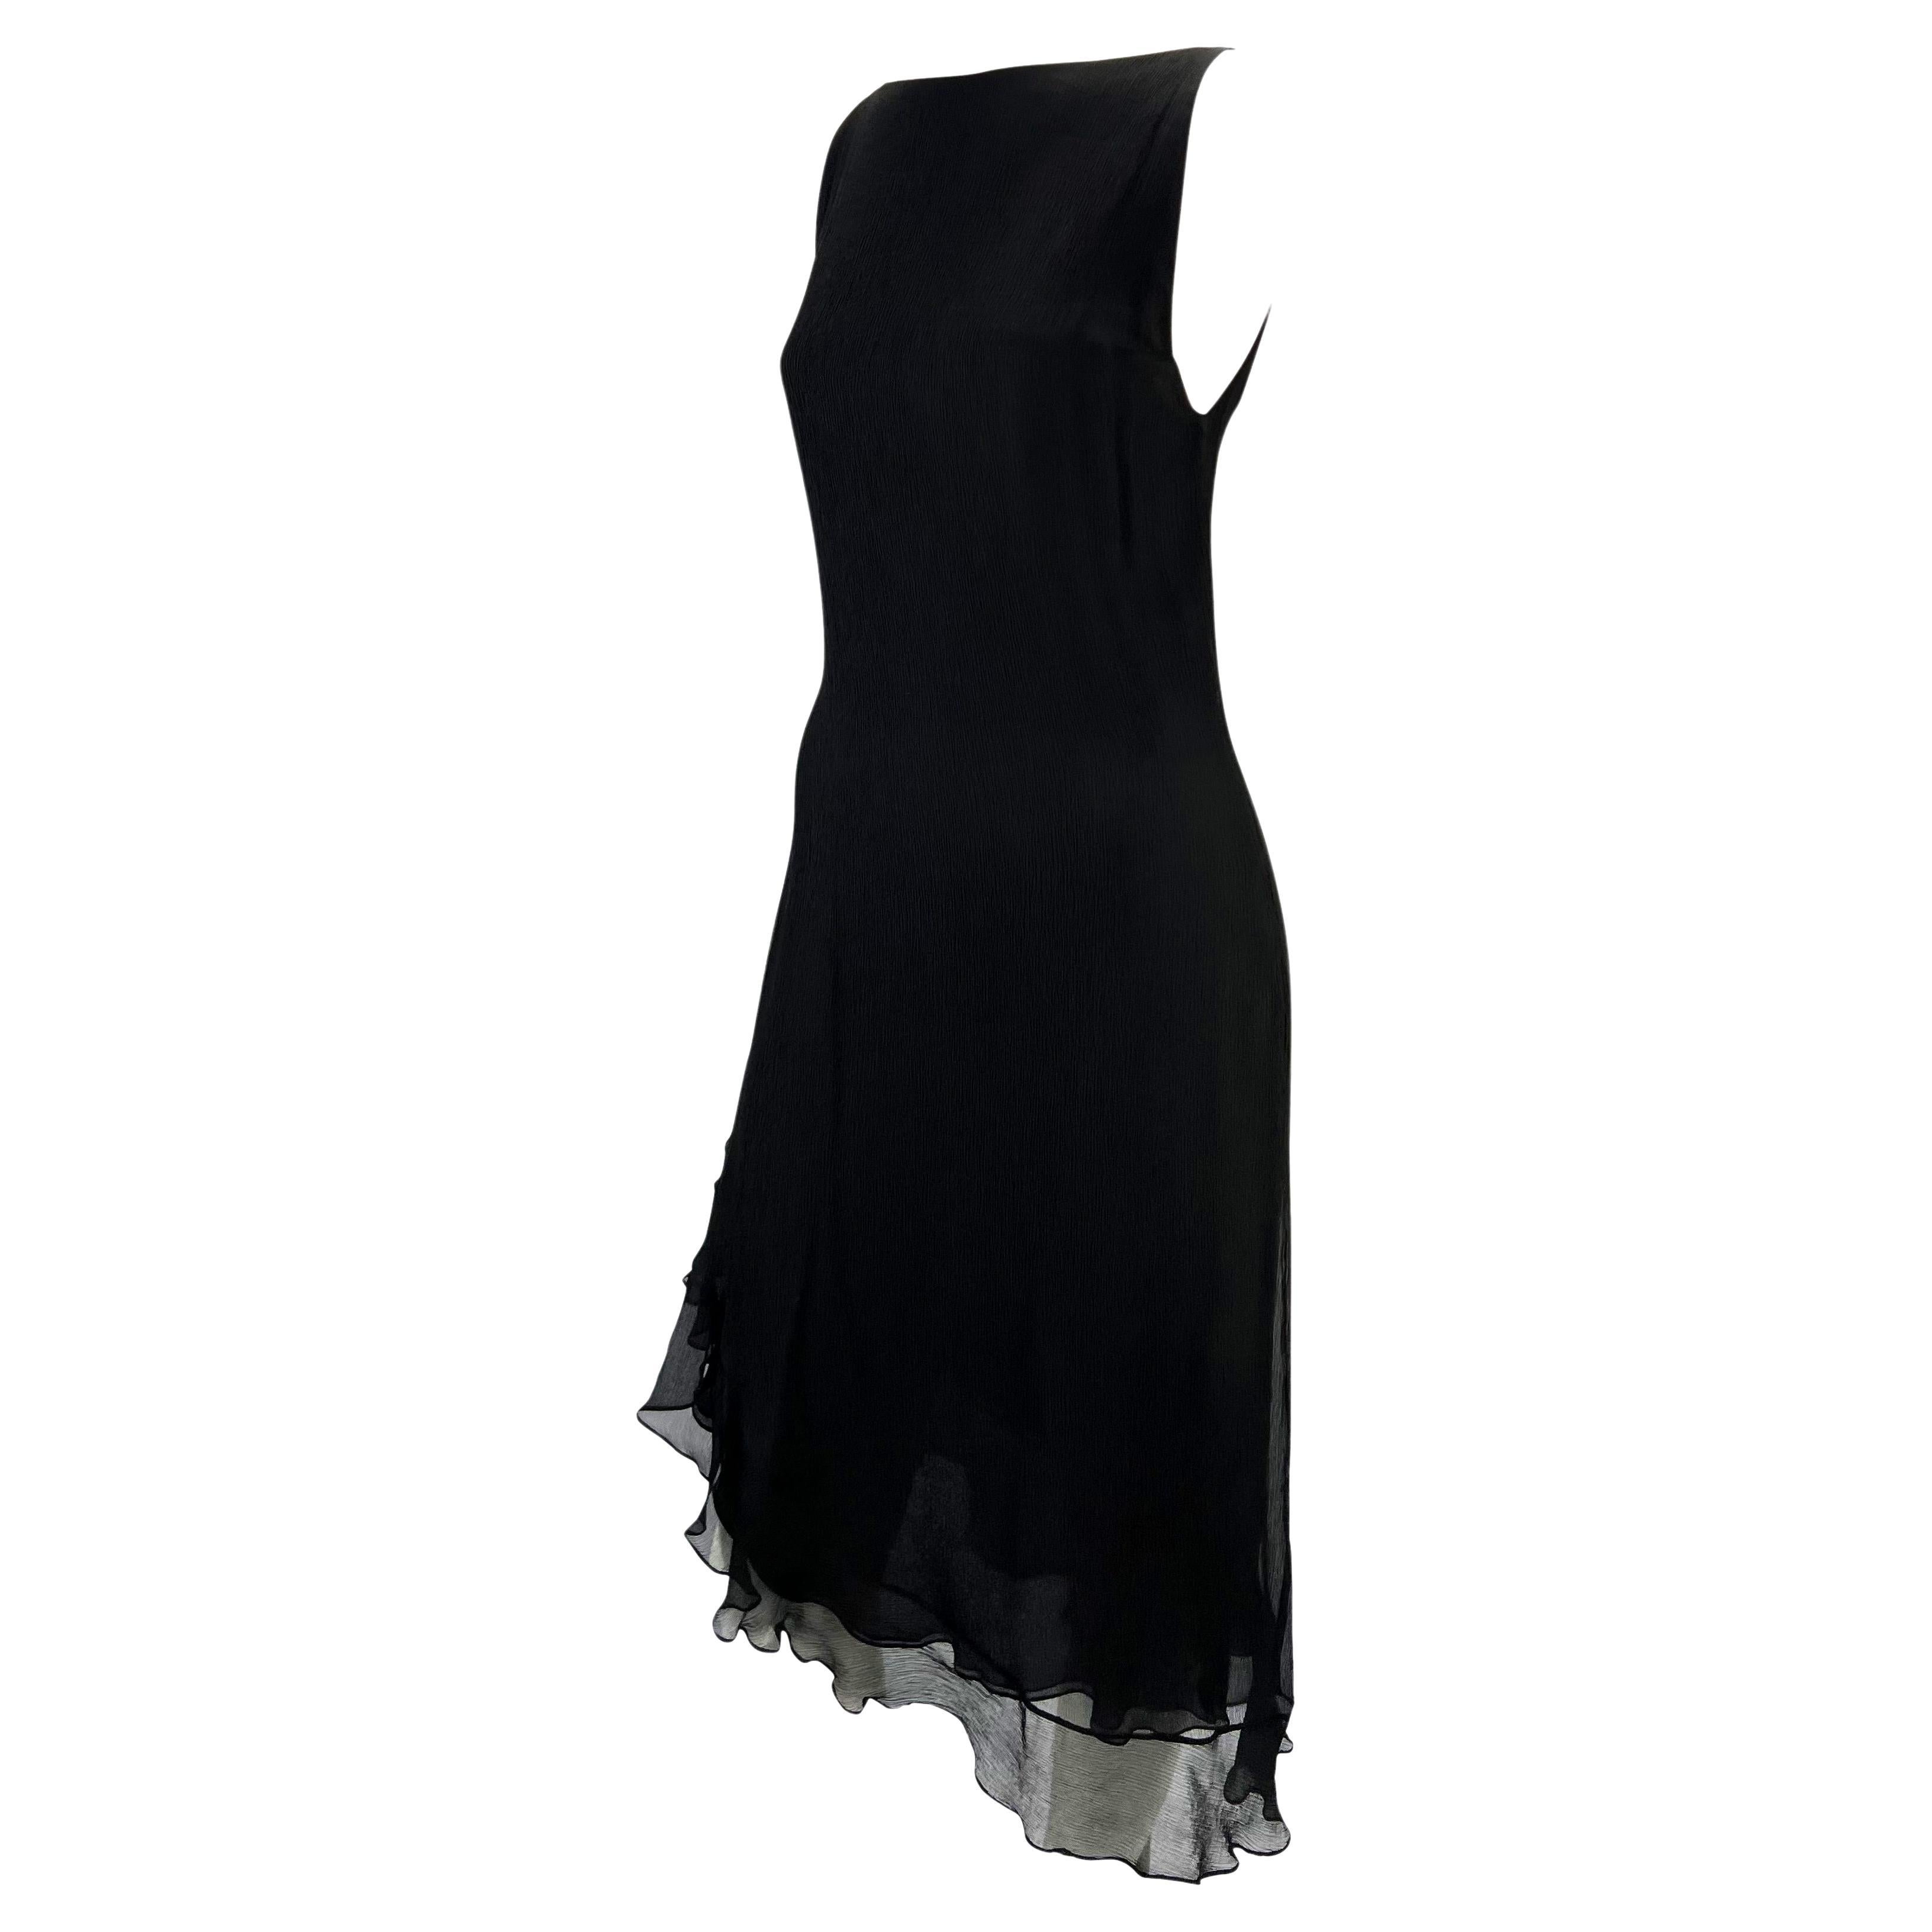 TheRealList presents: a beautiful black crepe silk Gucci dress, designed by Tom Ford. From the Spring/Summer 2000 collection, this effortlessly stunning dress features a high neckline and asymmetric ruffle hem. One armhole is intentionally left